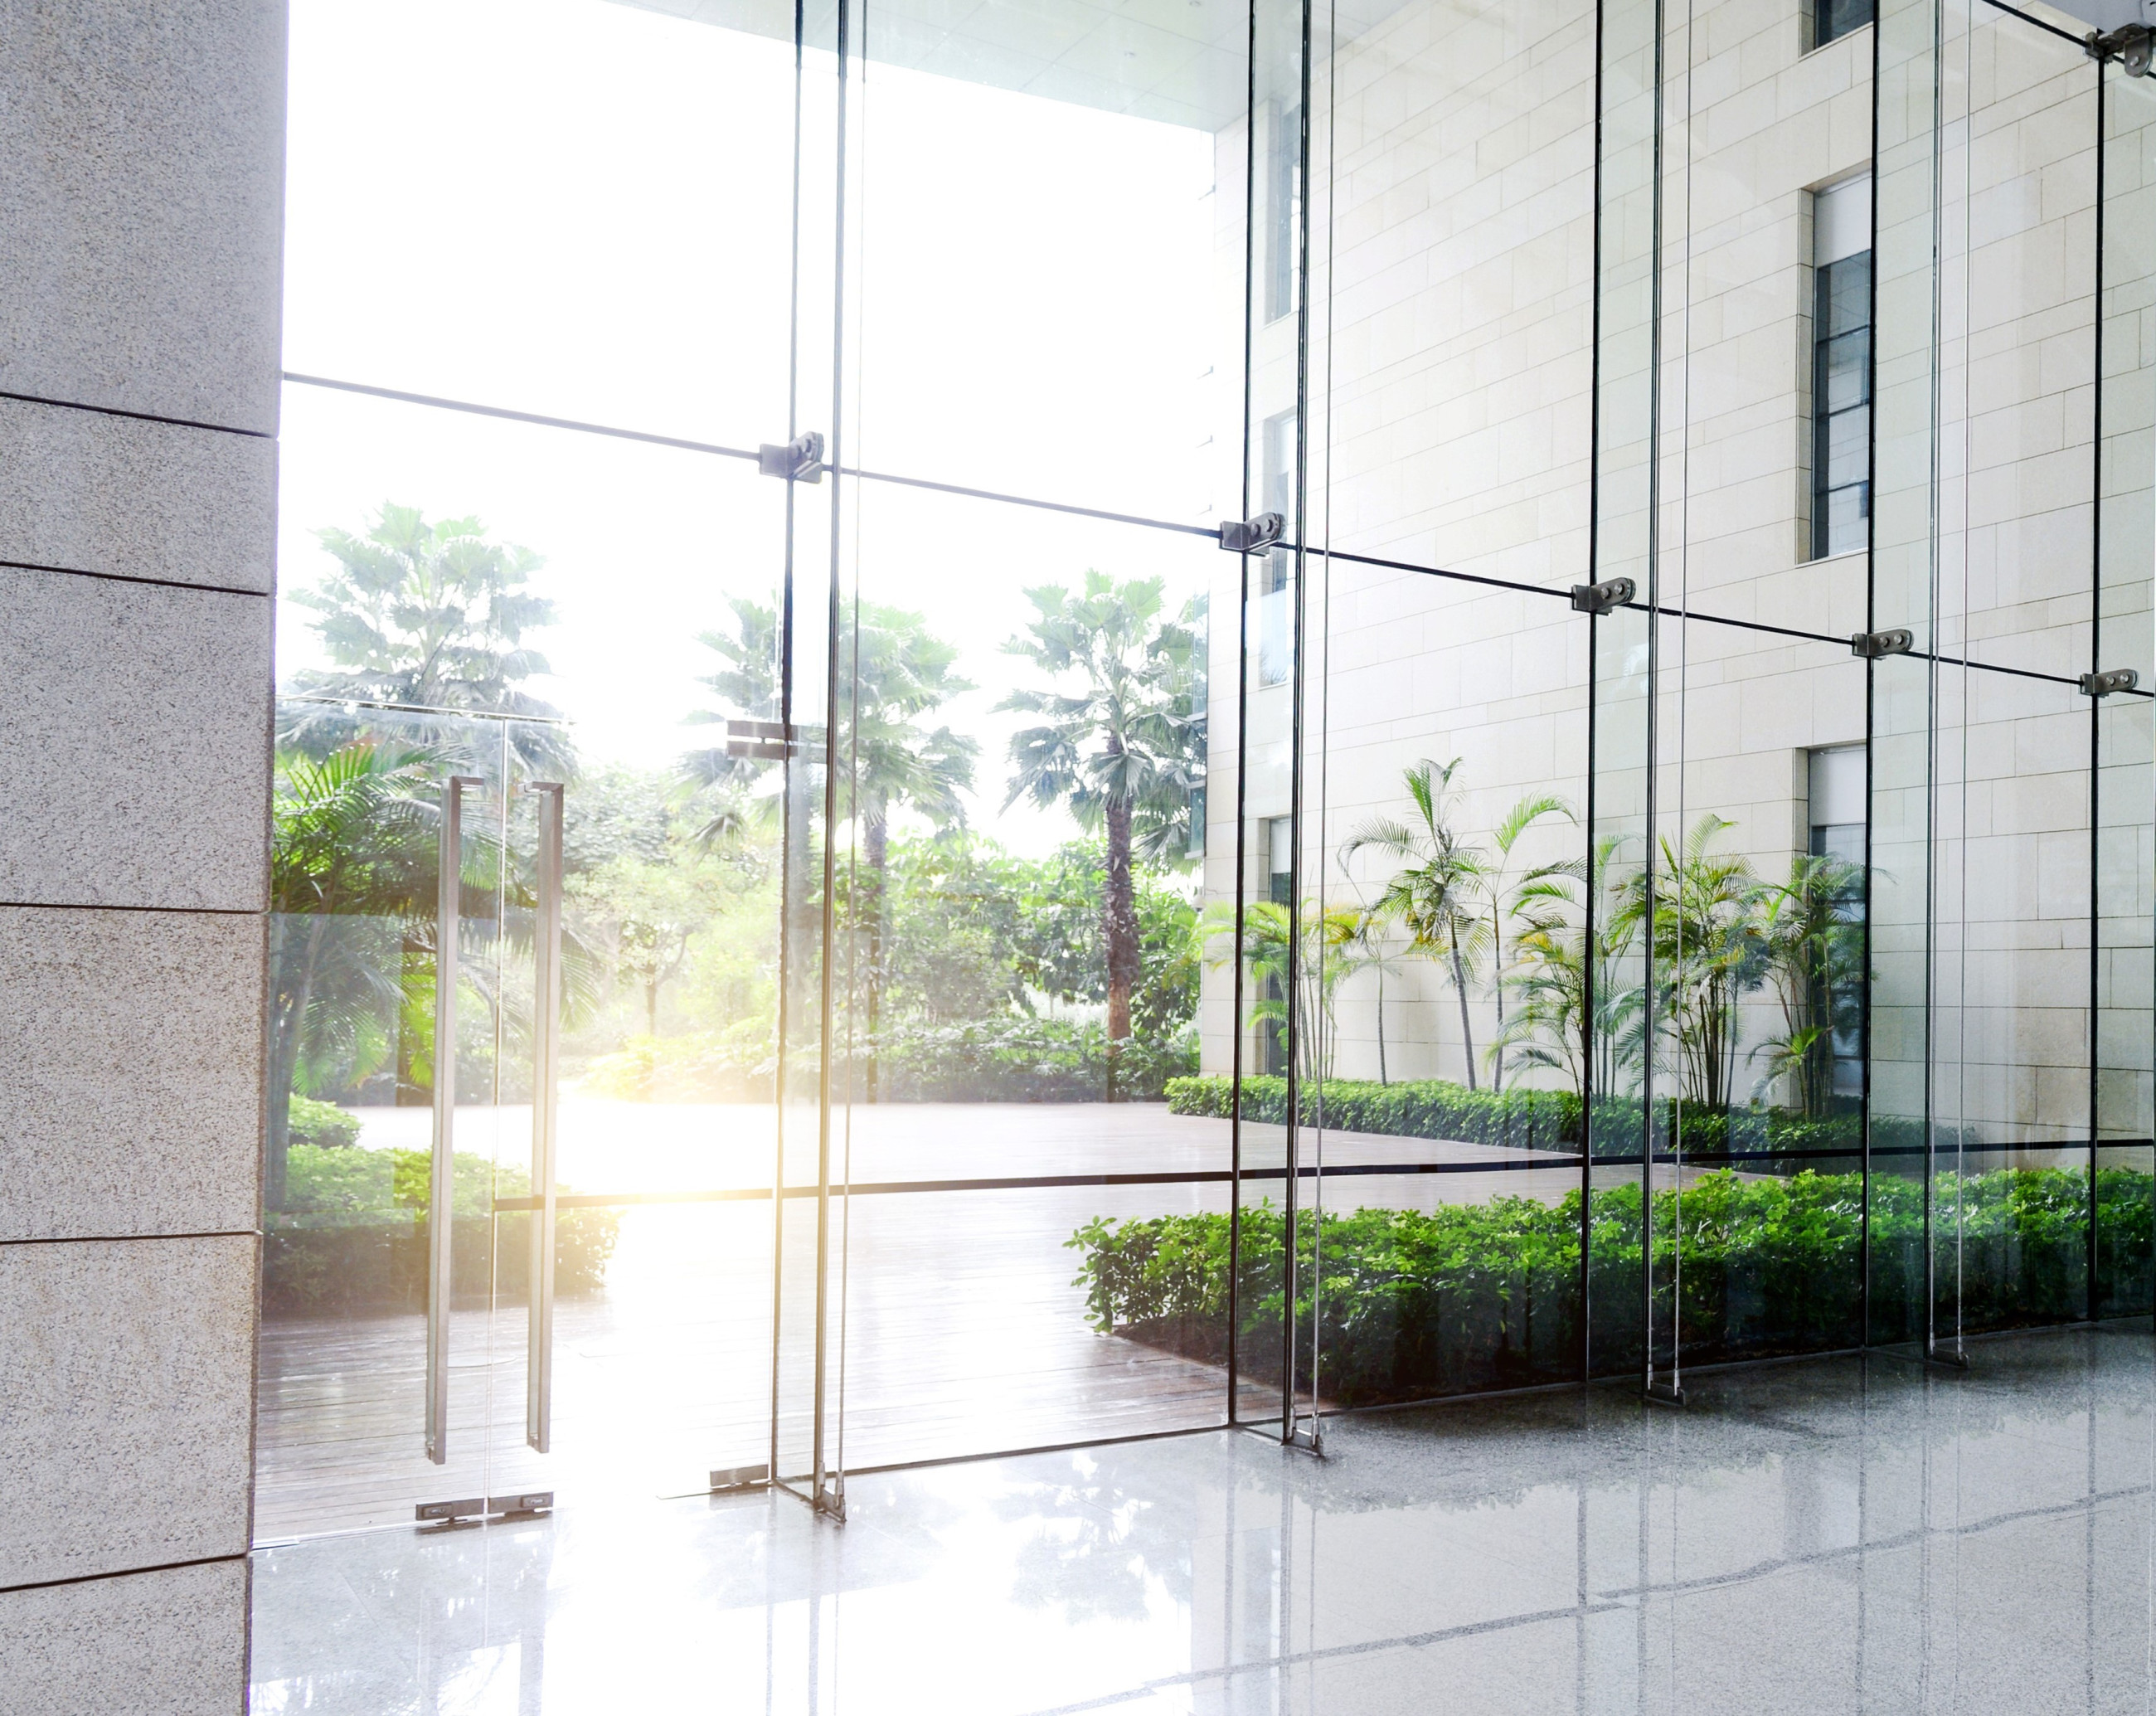 Floor-to-ceiling safety glass on commercial doors and windows